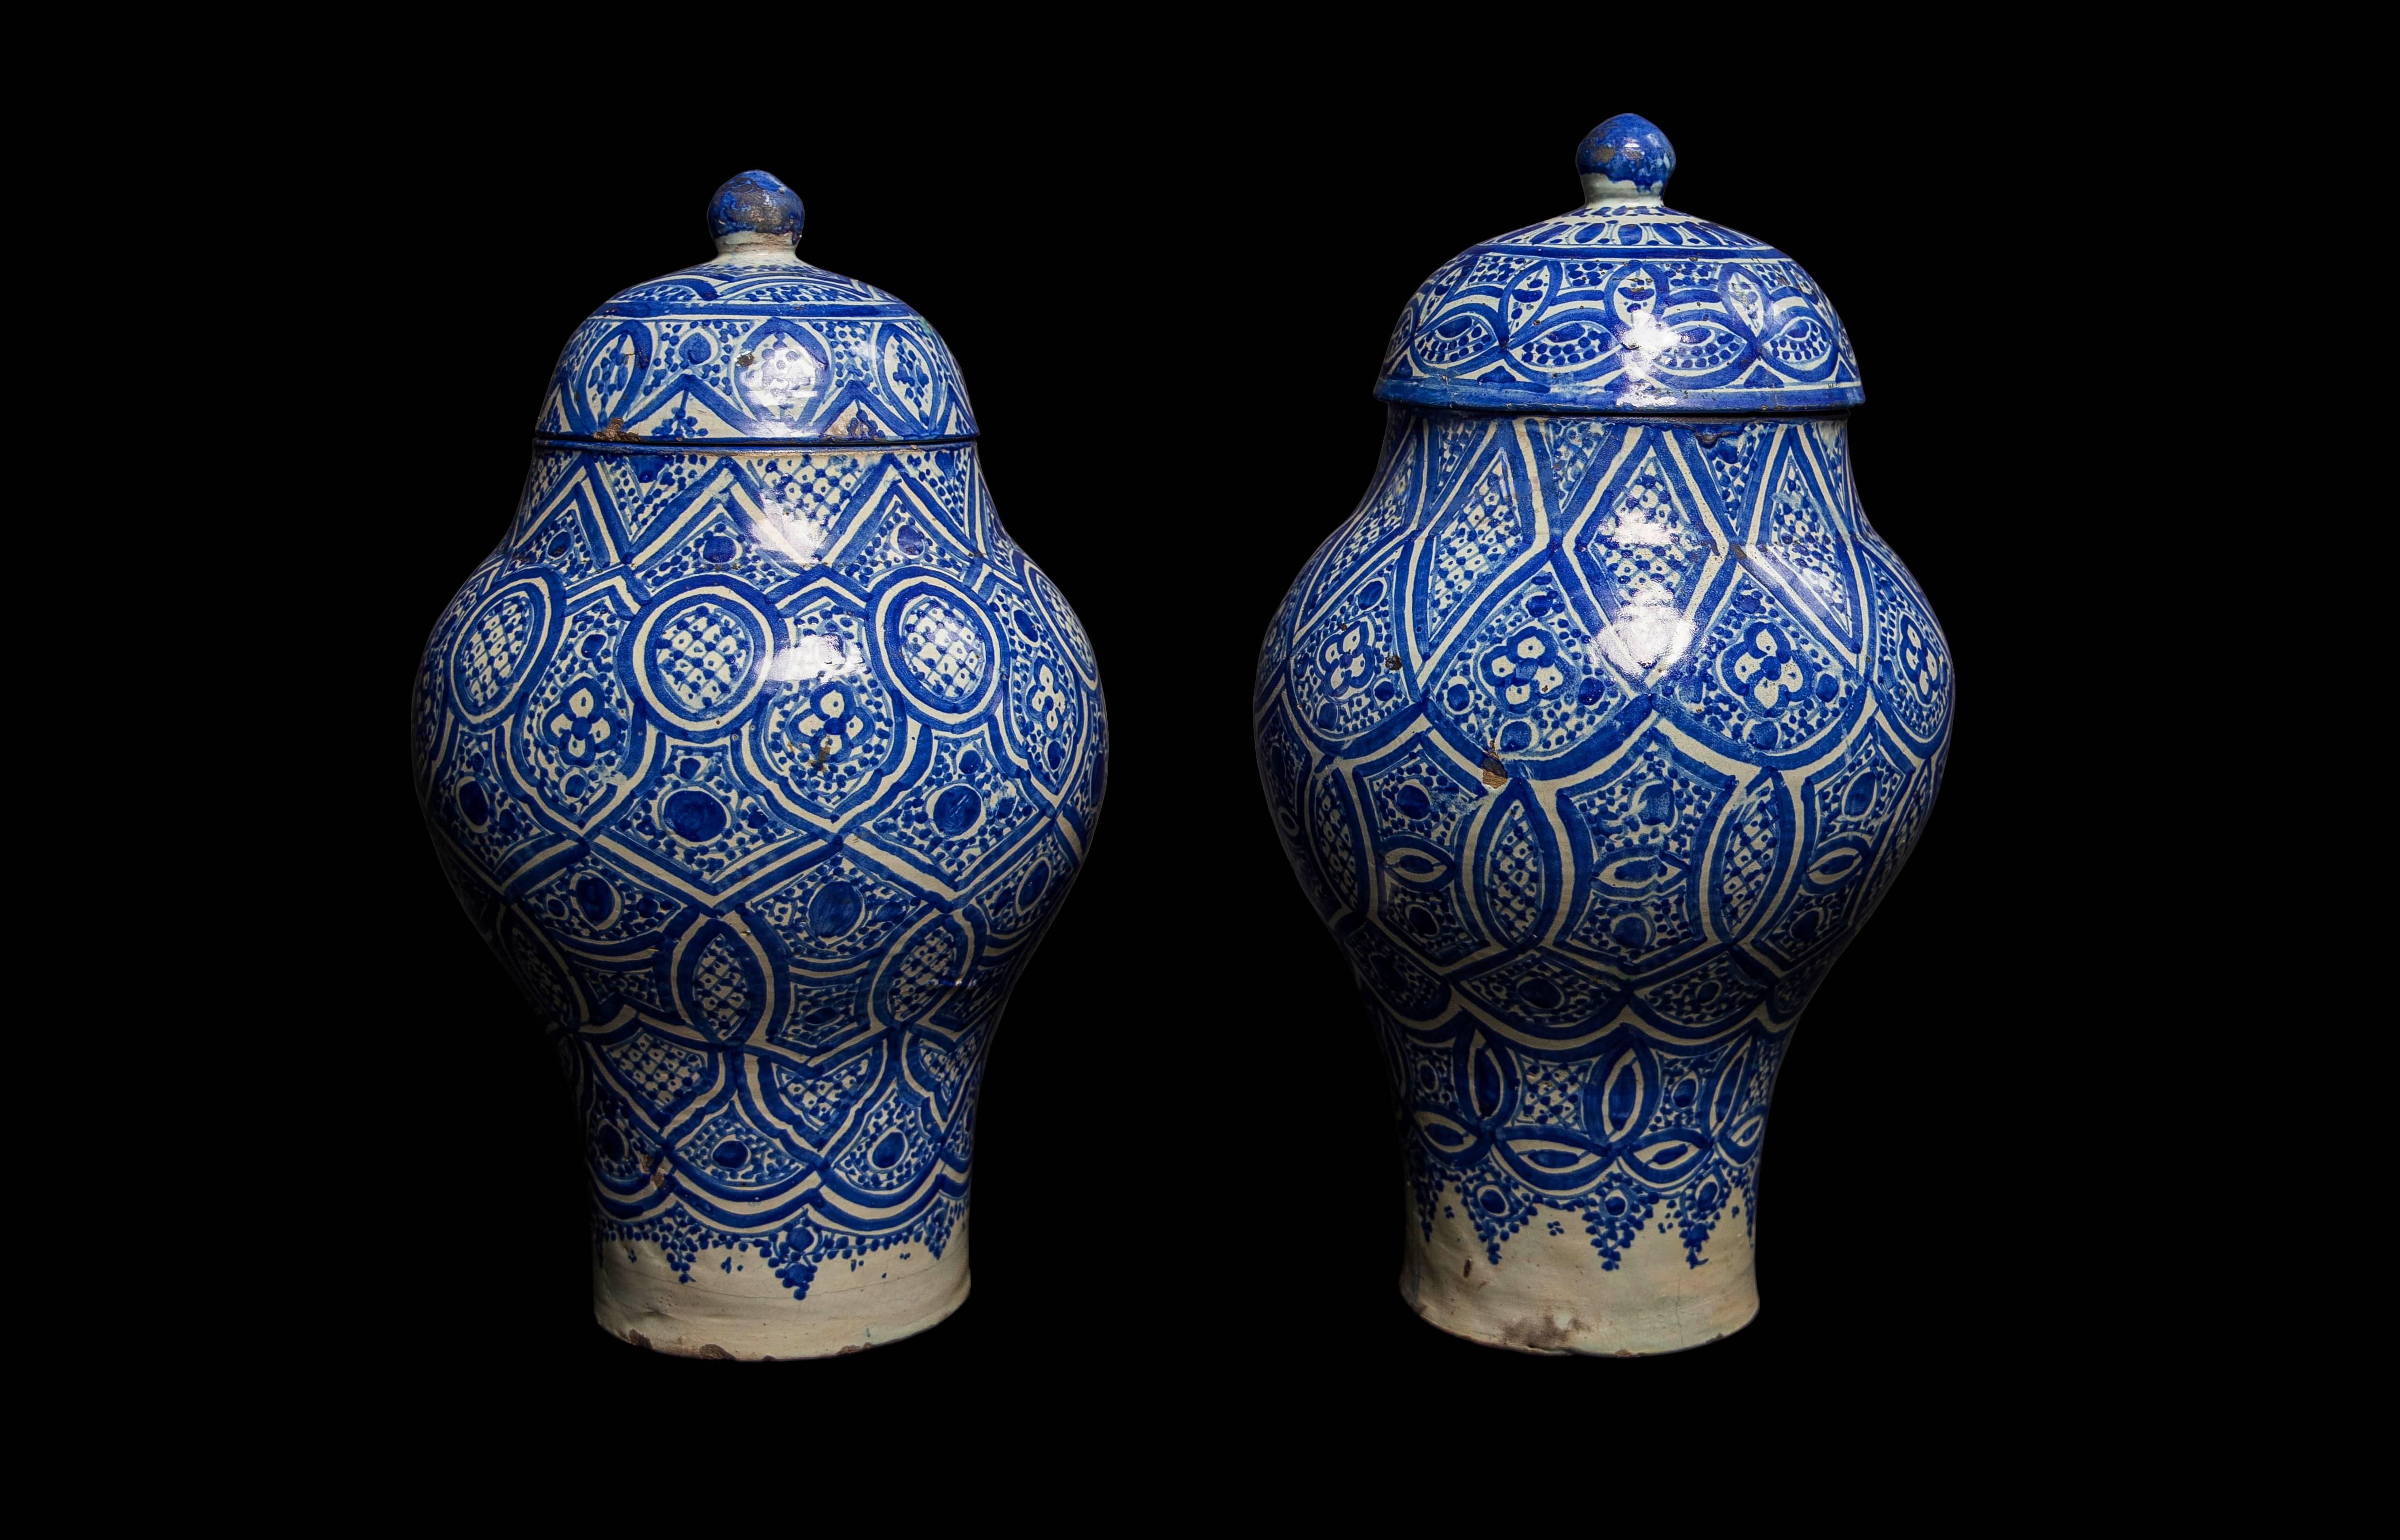 Originally used to preserve meat, these jars exude a personal quality and aged character. The blue and white geometric patterned glaze and shape is intrinsic to Fez pottery of this era. These pieces work beautifully in contemporary settings, lending